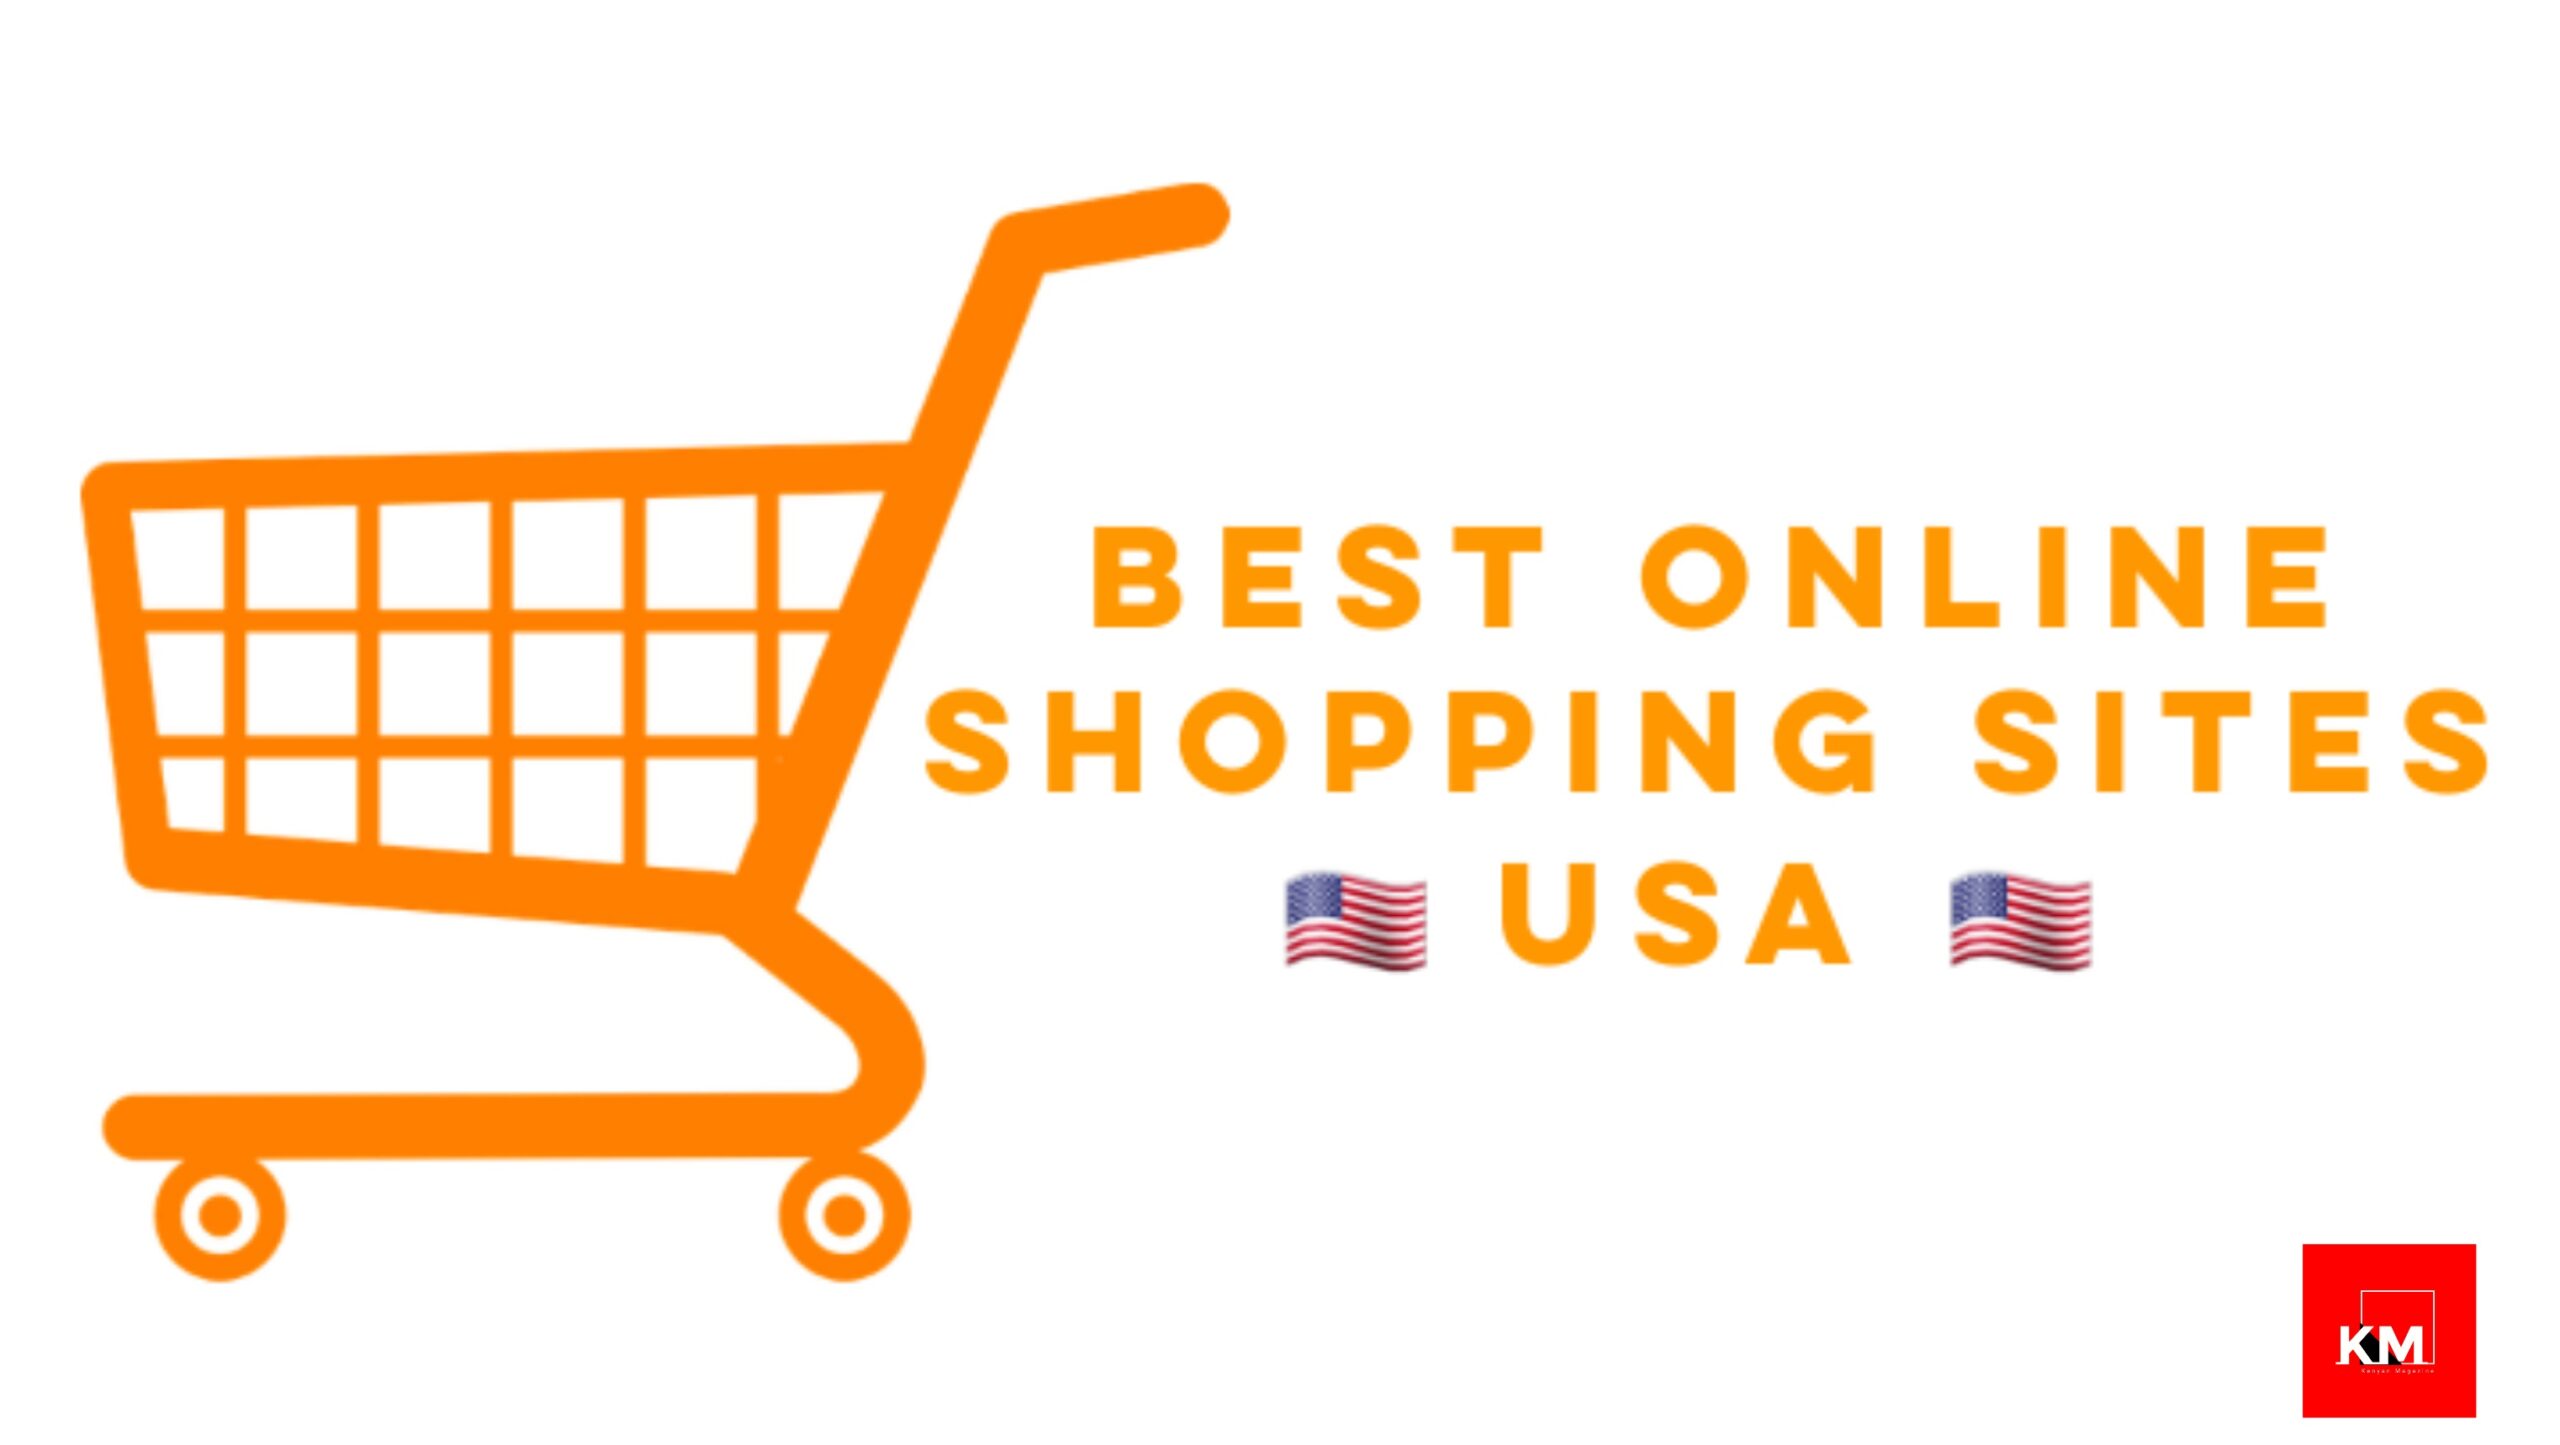 Online shopping sites in America